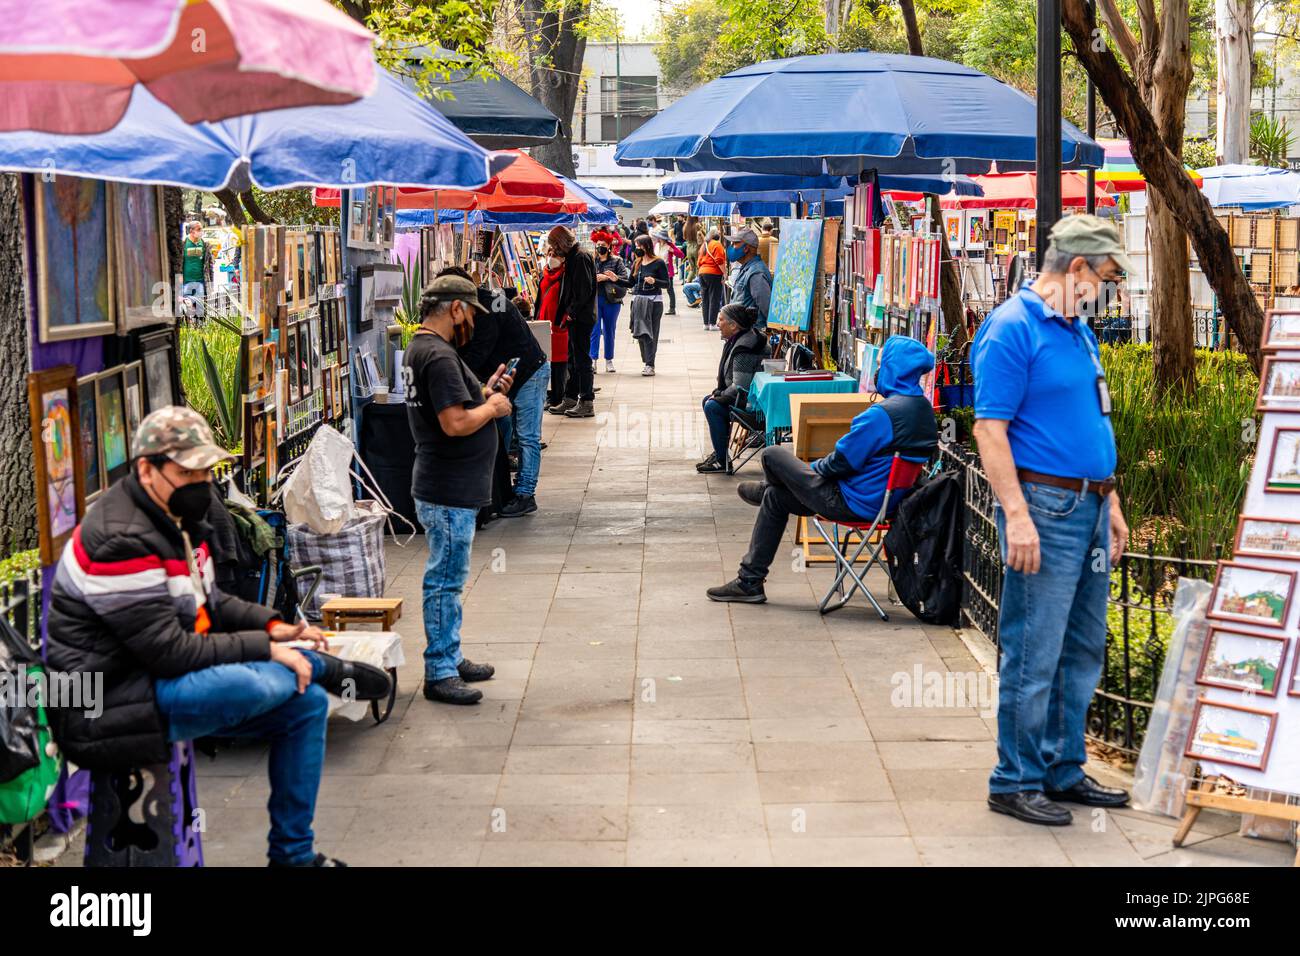 Artists and painters displaying their artwork in a park in Mexico City, Mexico Stock Photo